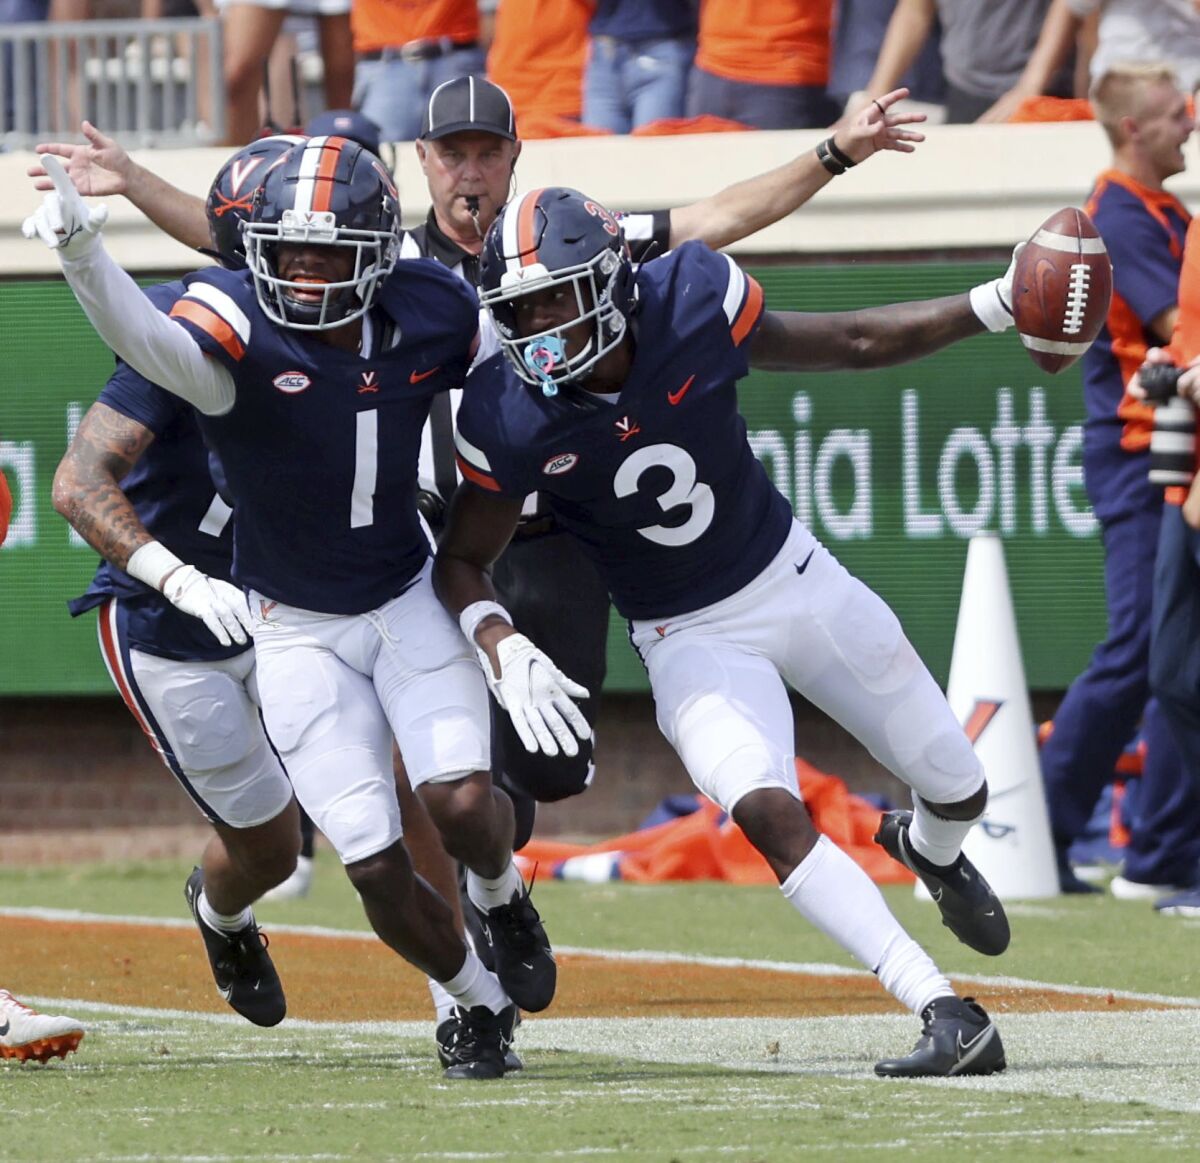 Virginia's Nick Grant (1) celebrates an interception by teammate Anthony Johnson (3) during an NCAA college football game against Illinois, Saturday, Sept. 11, 2021, at Scott Stadium in Charlottesville, Va. (Andrew Shurtleff/The Daily Progress via AP)